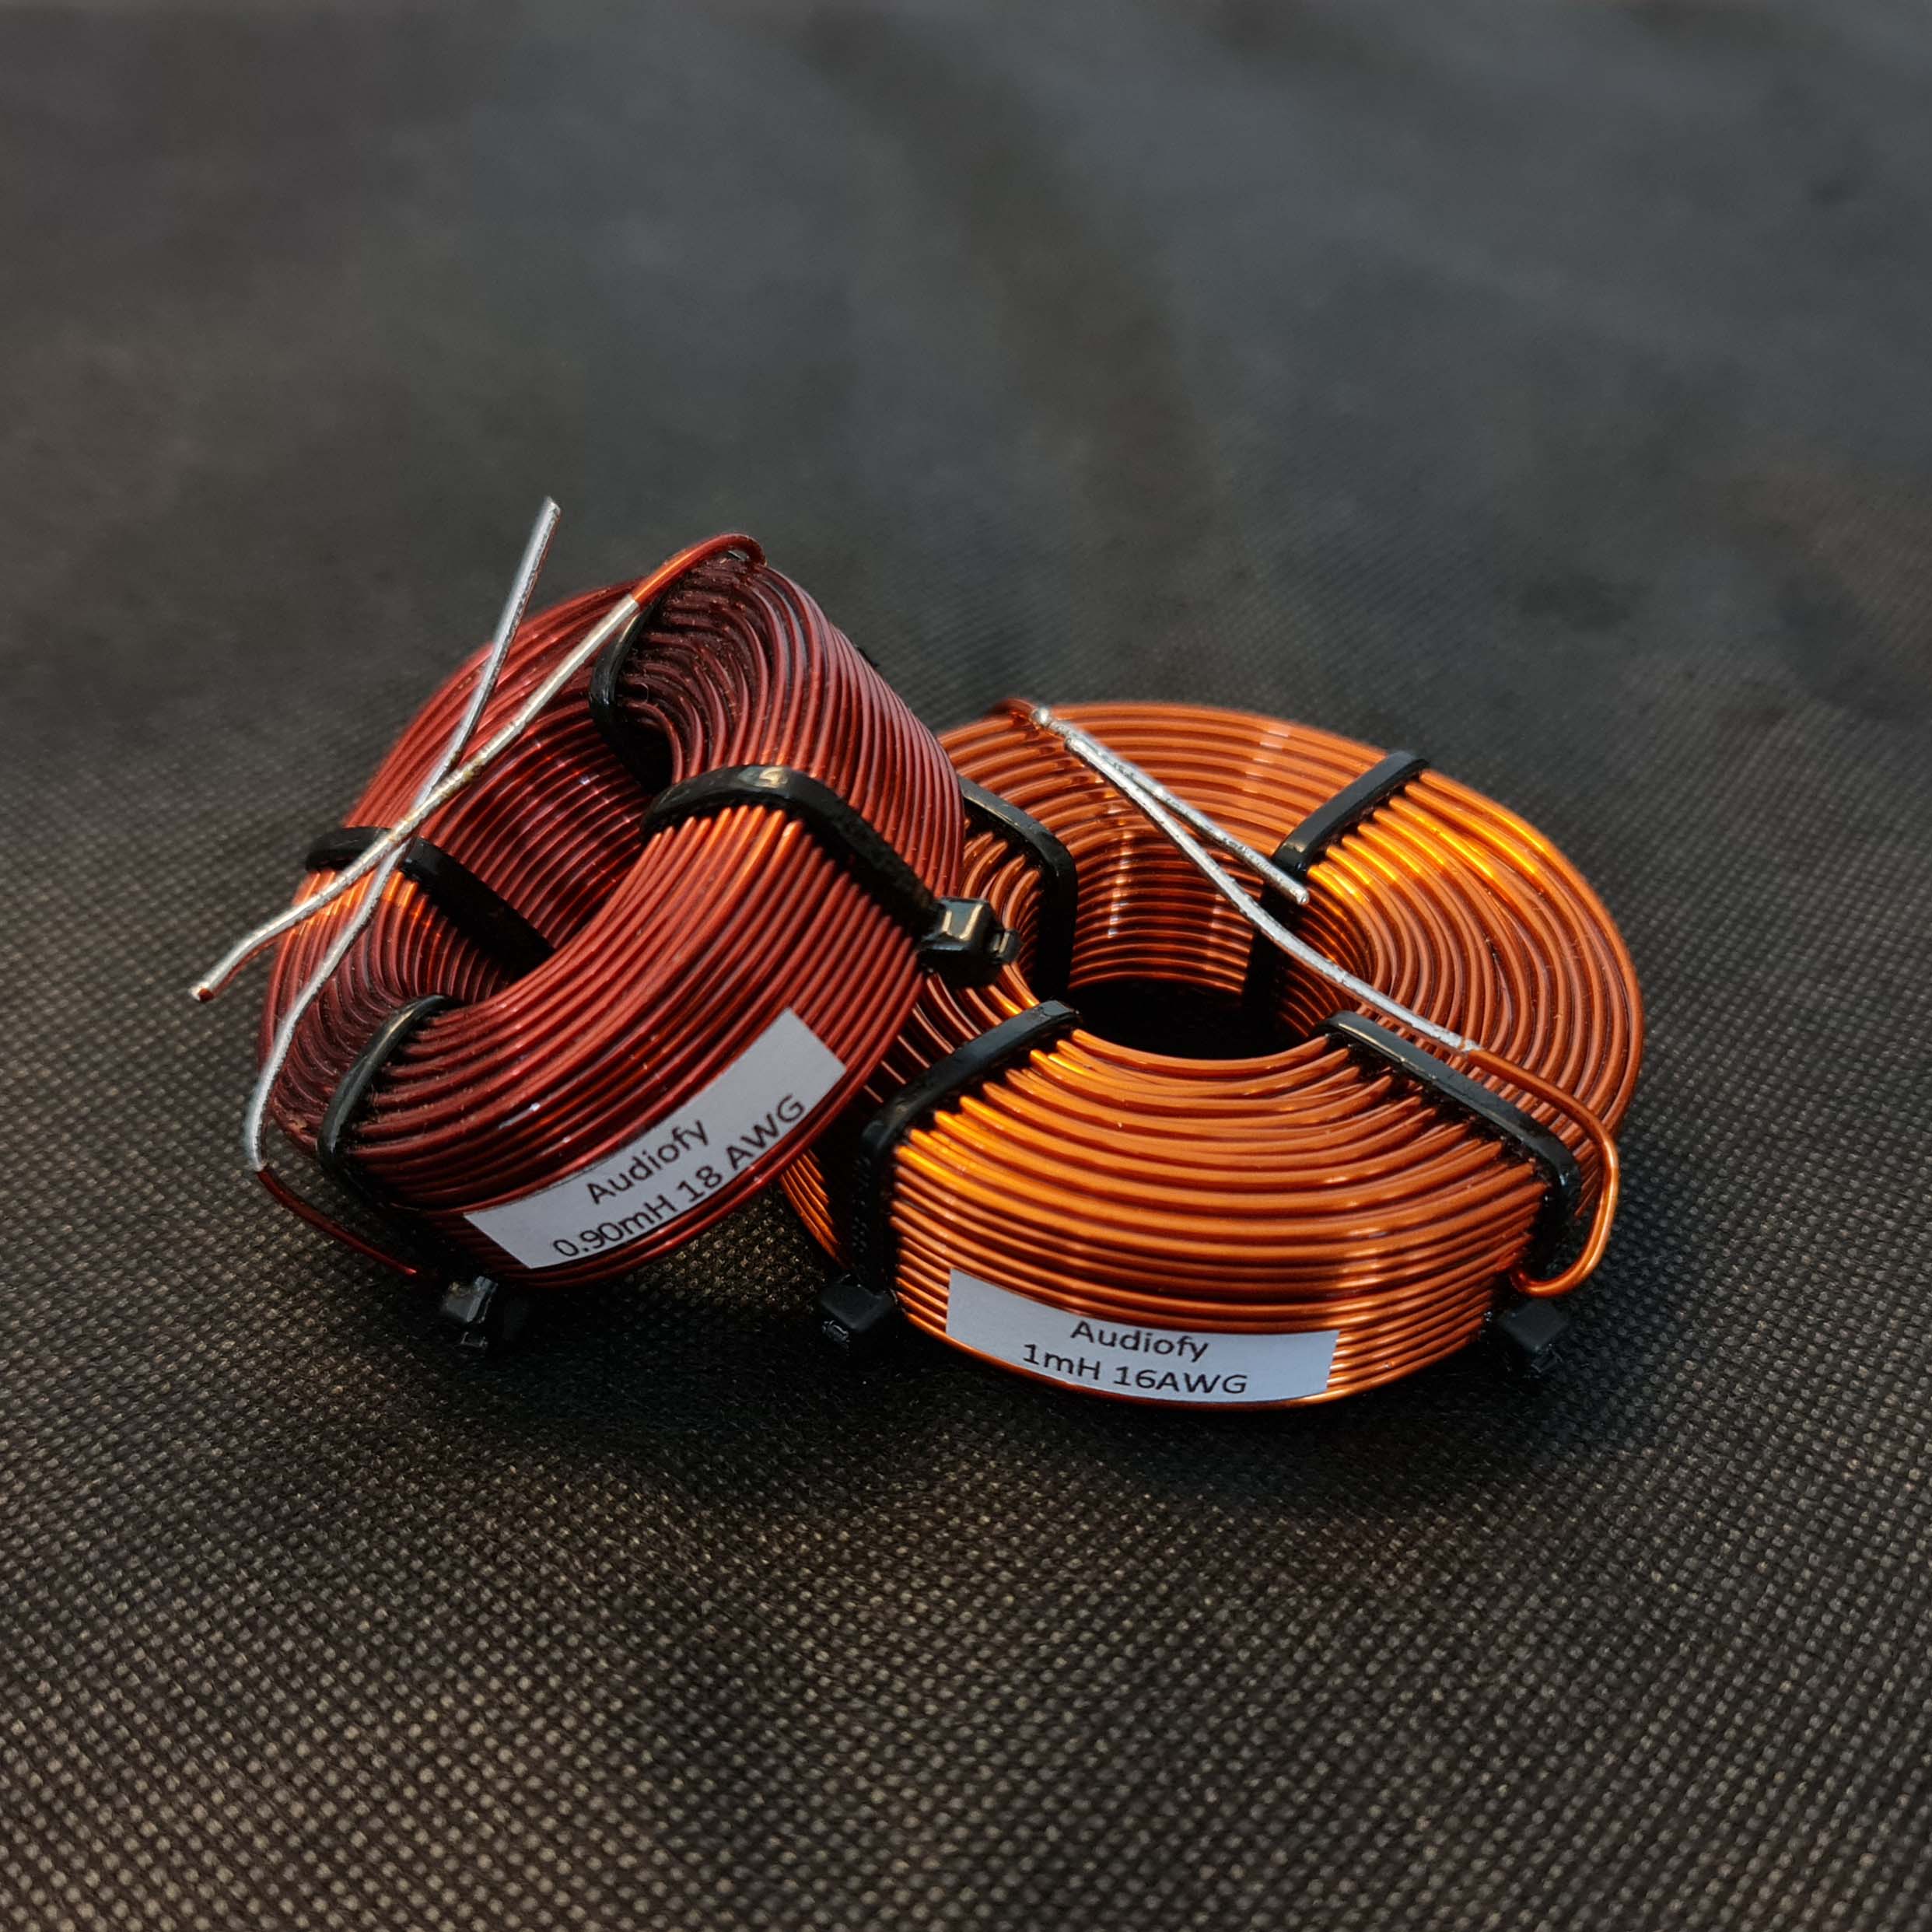 Audiofy 1.5mH 16 AWG Air Core Crossover Inductor